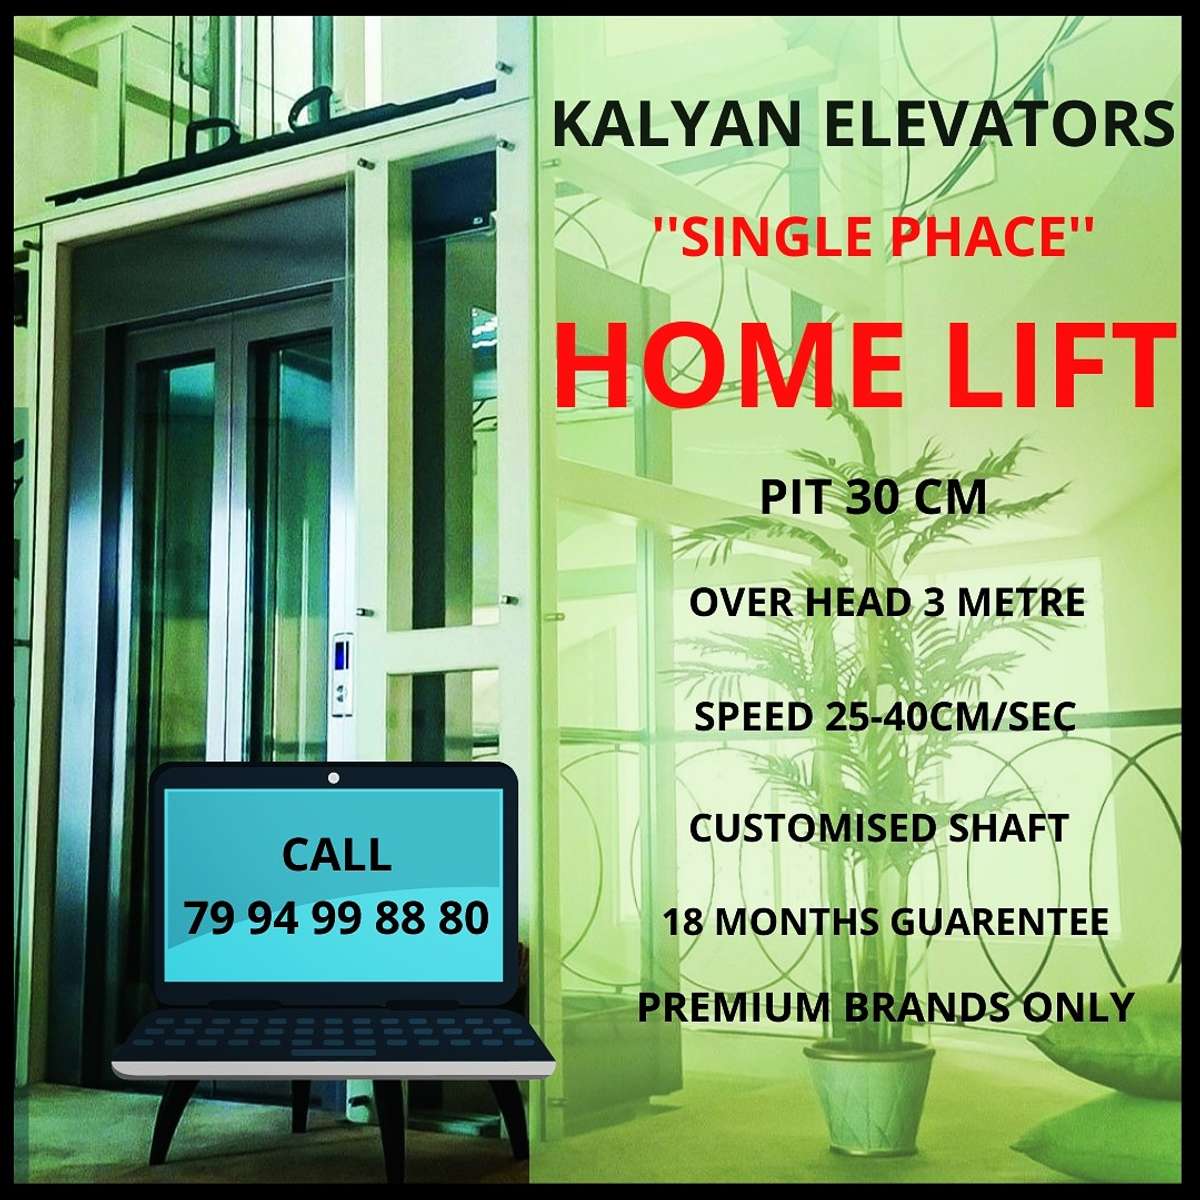 Kalyan Home Elevators offers the long-awaited solution to vertical mobility within homes at affordable prices and easy-to-use features. Our customized and aesthetically designed home lifts are easily installable in preexisting homes as well as houses under construction, and help you relieve the headache of climbing. More details:- 

we do all kind of :-
Home Lifts
Hospital Lifts
Capsule Lifts
Commercial Lifts
Customised Passenger Lifts
Car Lifts
Parking Lifts